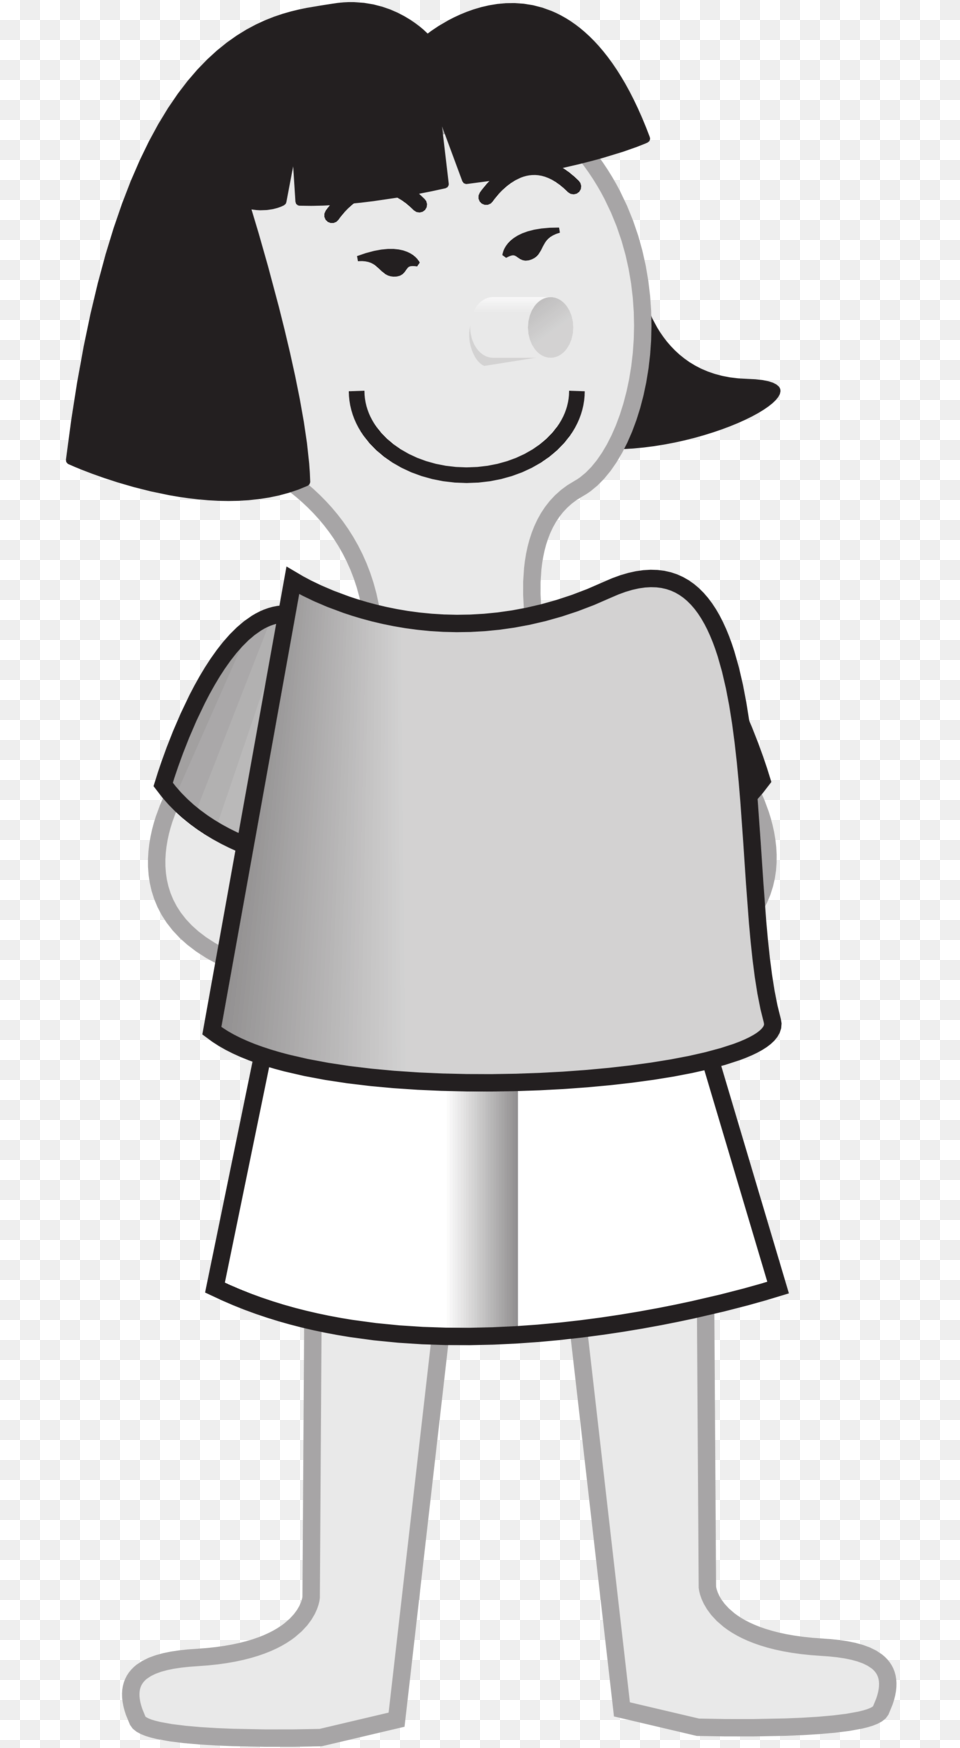 Space, Cape, Clothing, Baby, Person Png